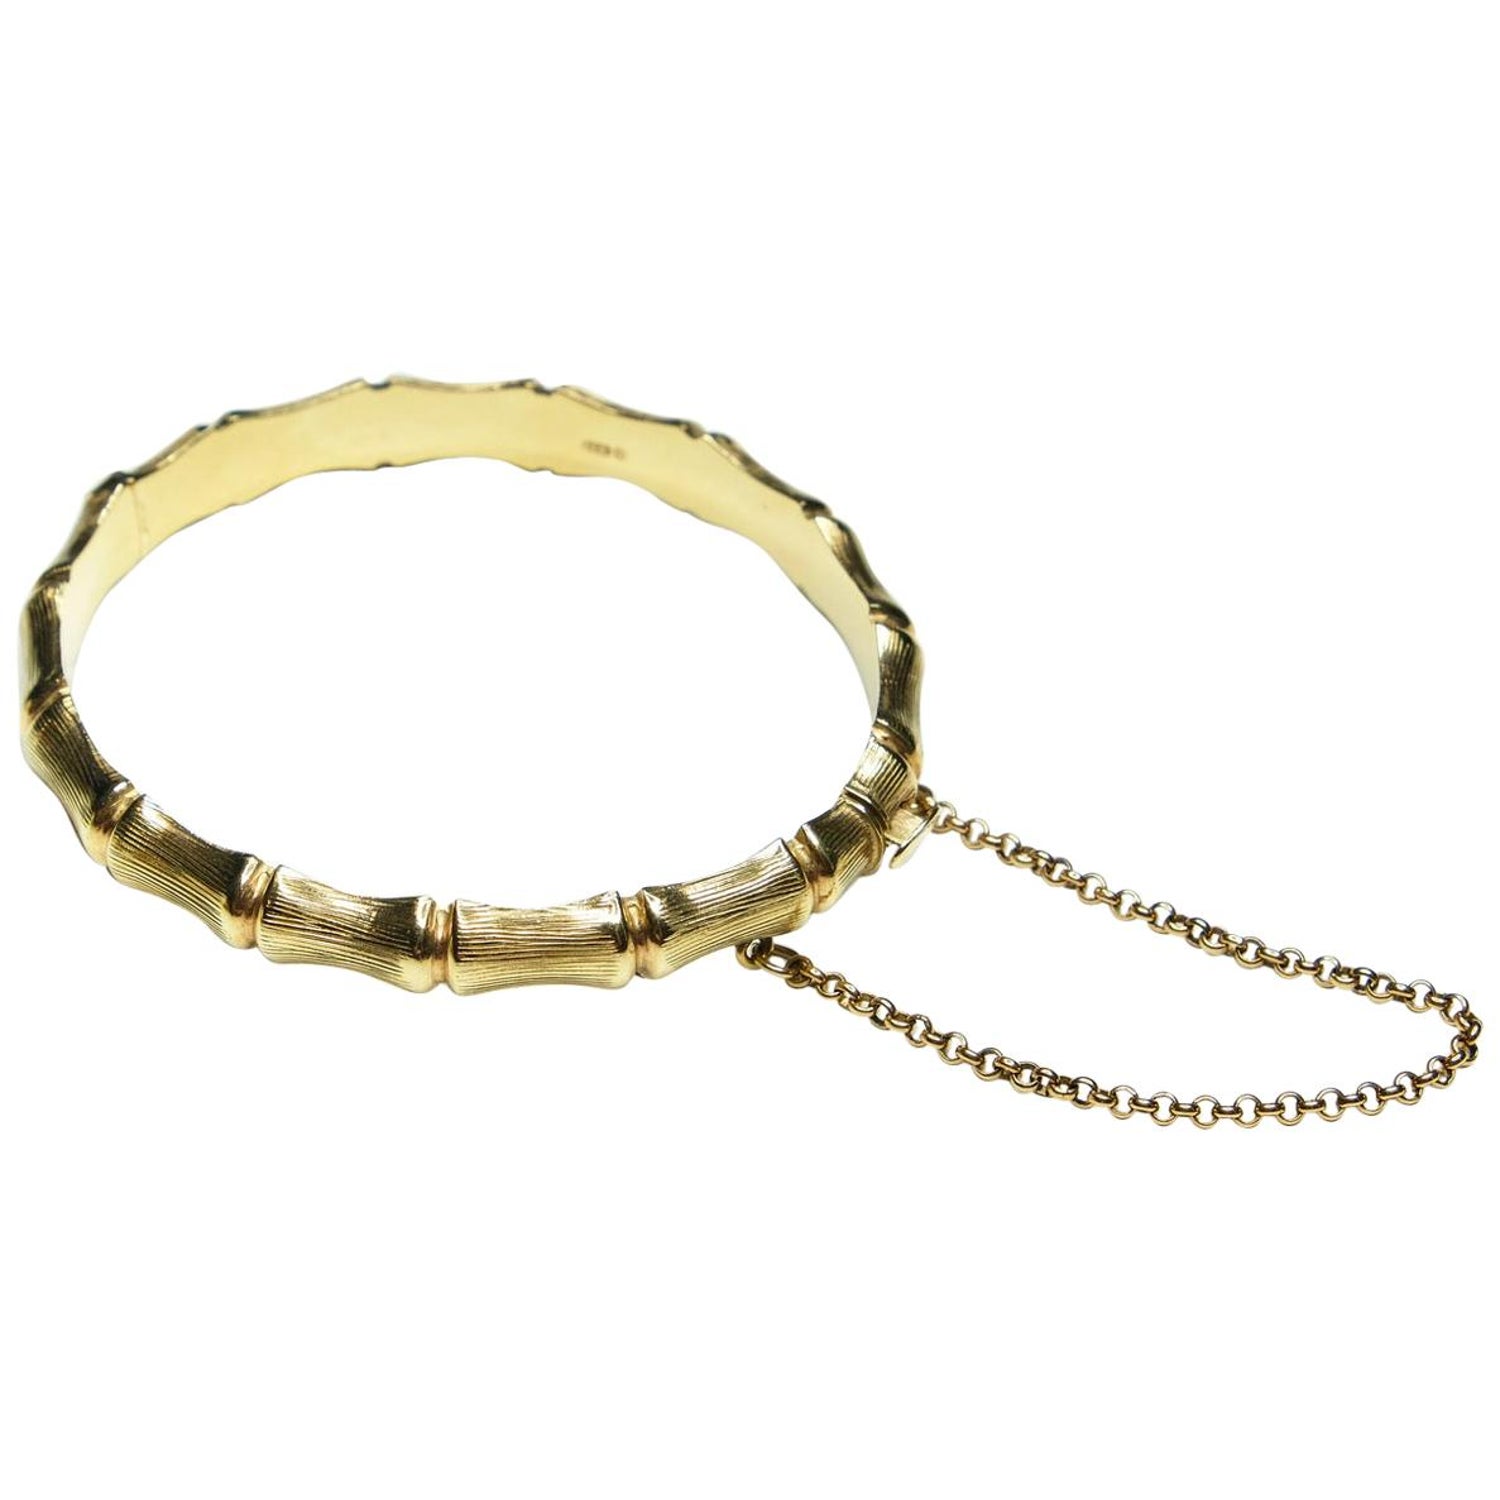 Bamboo Bracelet 9 Carat Yellow Gold, British Made For Sale at 1stDibs